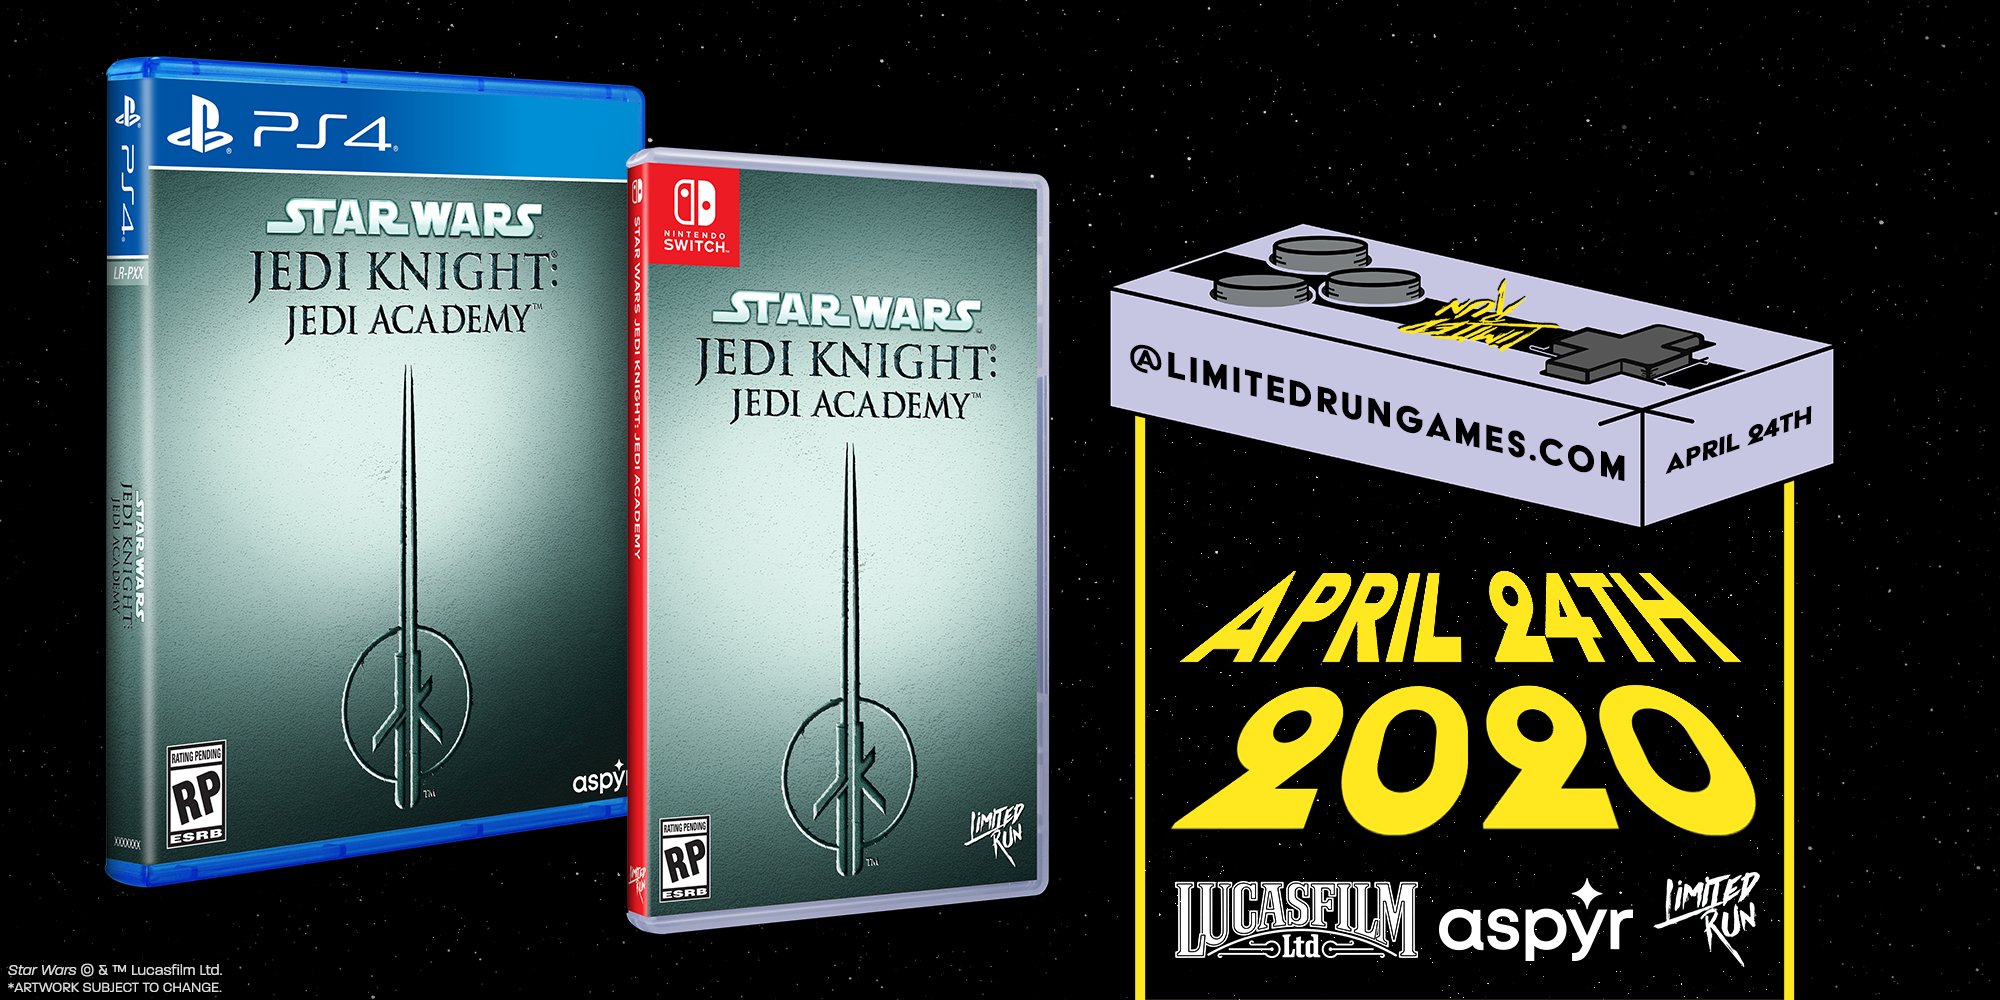 dessert Definition Besøg bedsteforældre Limited Run Games on Twitter: "Finish the Jedi Knight saga with Star Wars  Jedi Knight: Jedi Academy, available NOW on https://t.co/5Lksol4sqo in  physical form for the Switch, PS4, and PC. Standard editions